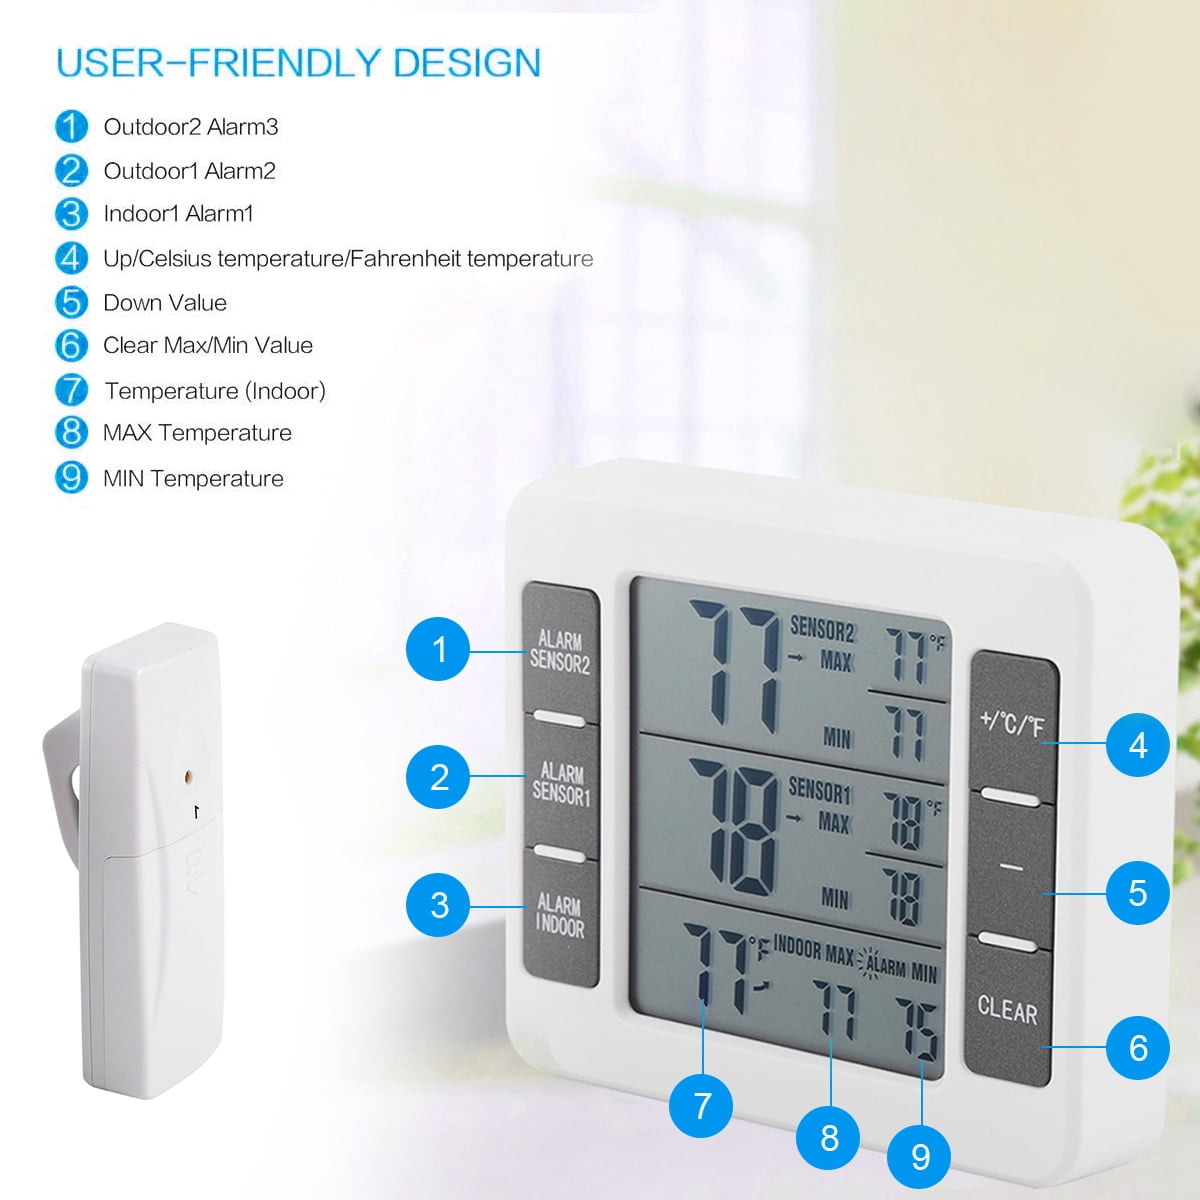 Brifit Refrigerator Thermometer, Wireless Digital Freezer Thermometer with 2 Sensors, Audible Alarm, Min and Max Record, Large LCD Display for Home